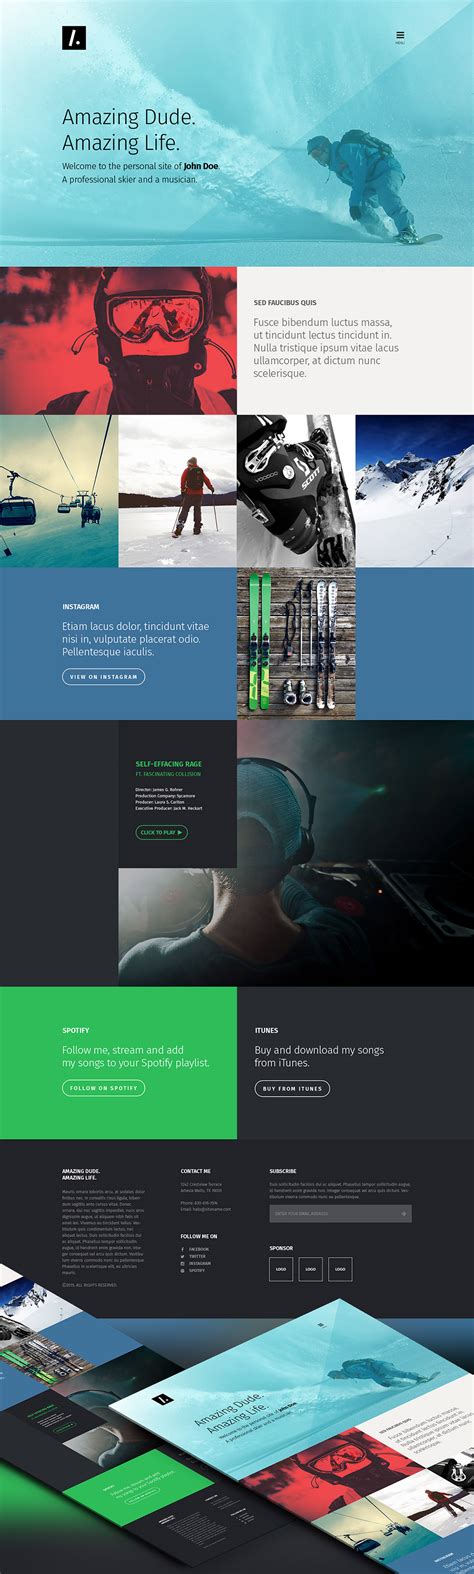 One Page Personal Portfolio Website Template Free Psd Download Psd